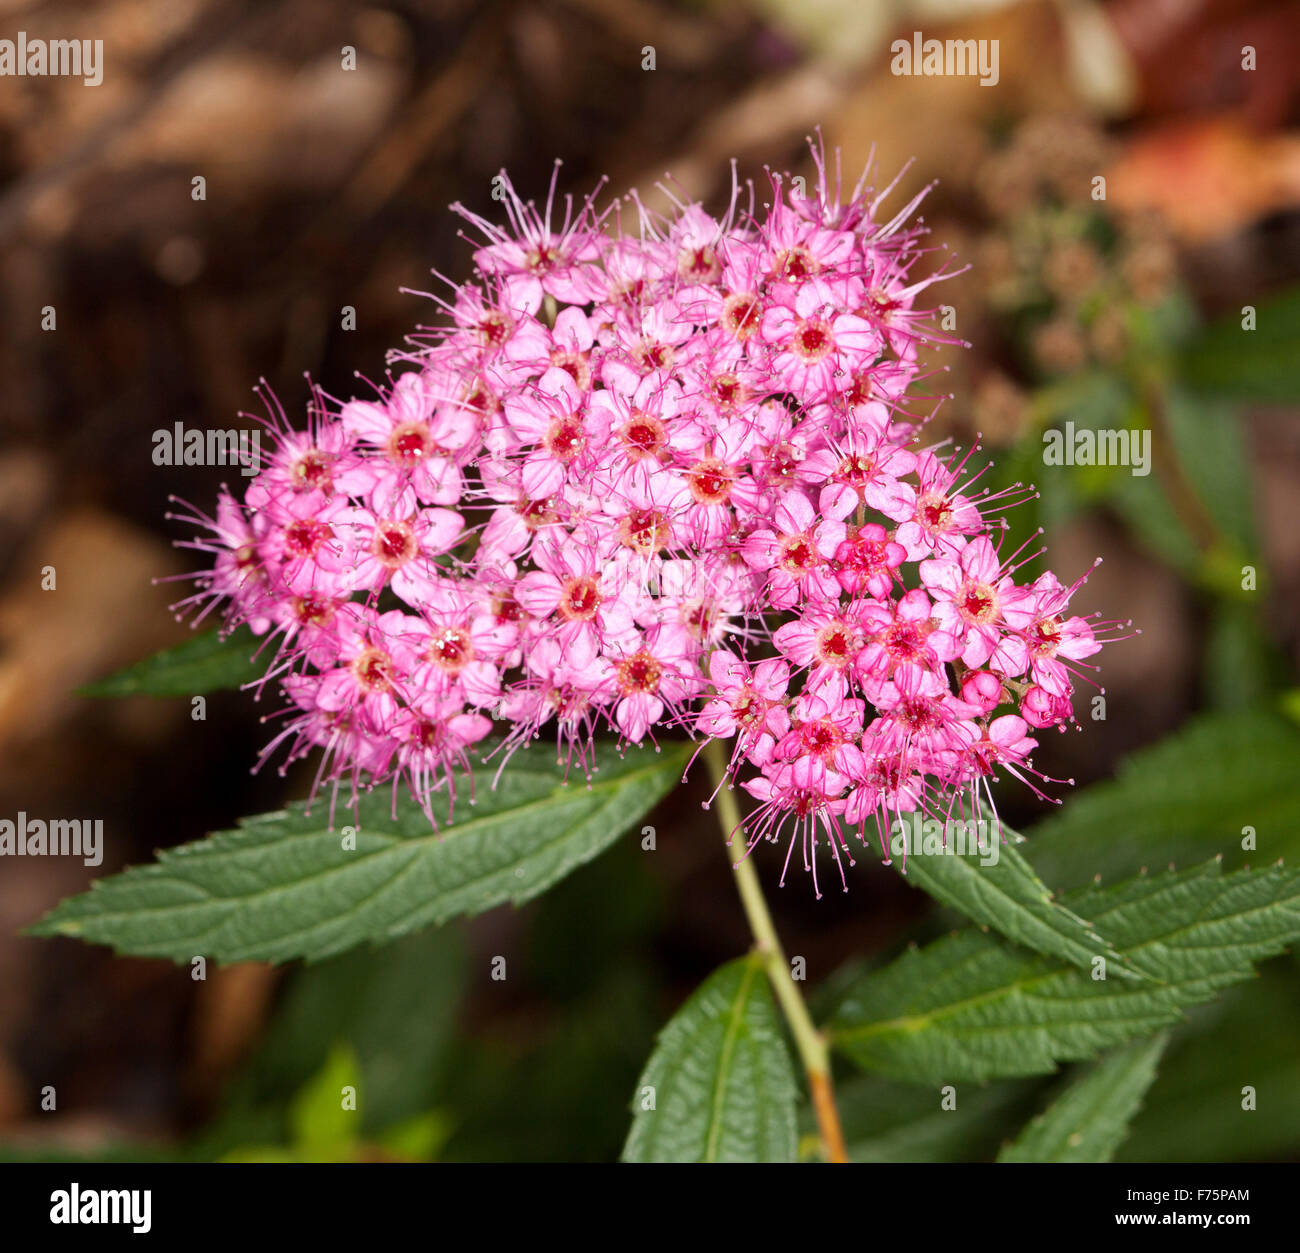 Cluster of red / pink flowers & green leaves of deciduous shrub Spiraea japonica 'Anthony Waterer', May bush, against dark background Stock Photo